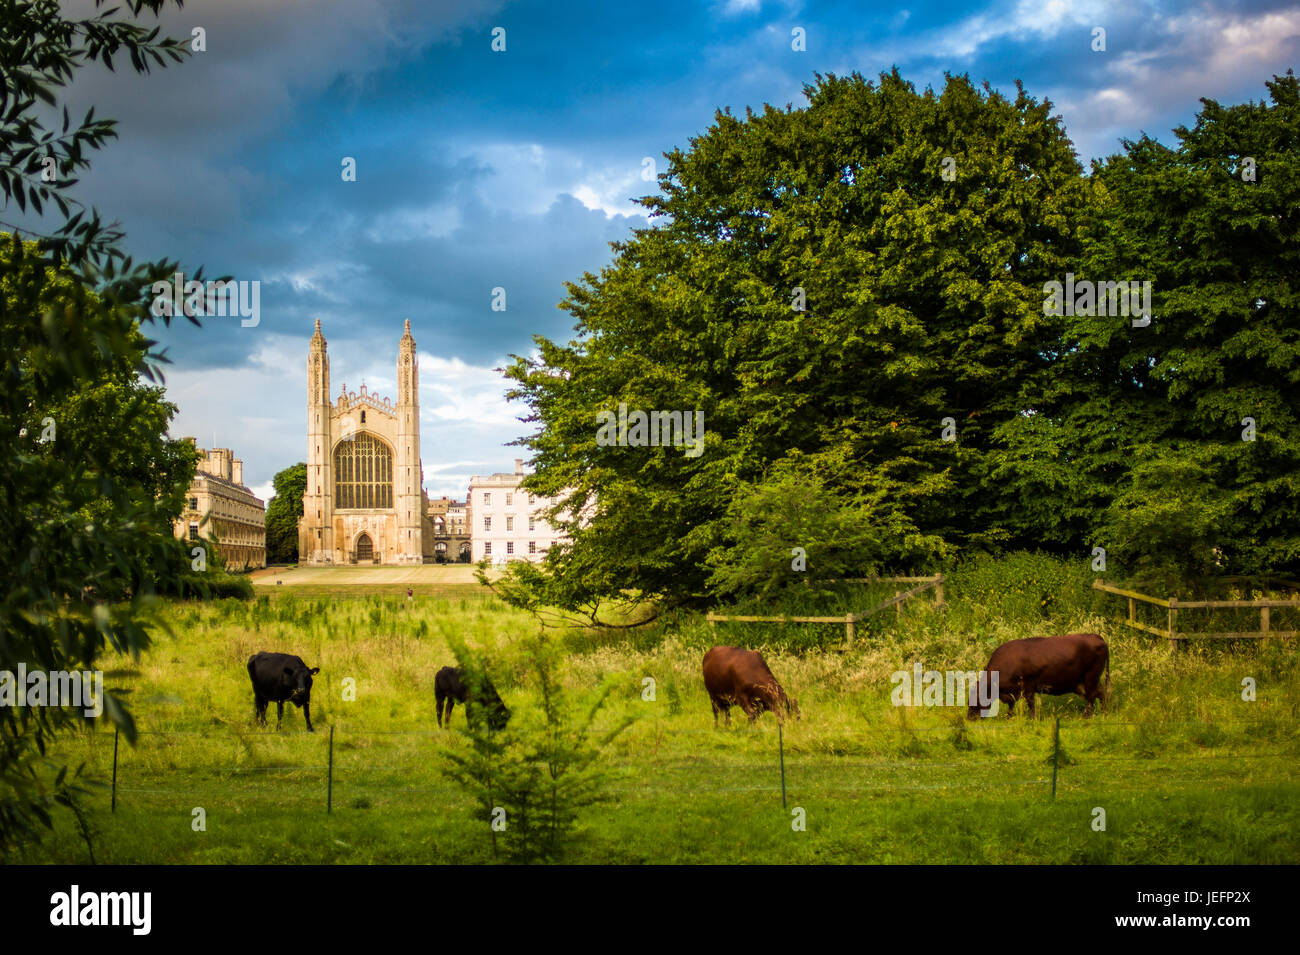 Cambridge Cows. Kings College Chapel, a classic view across the Backs towards Kings College and Clare College, parts of the University of Cambridge. Stock Photo